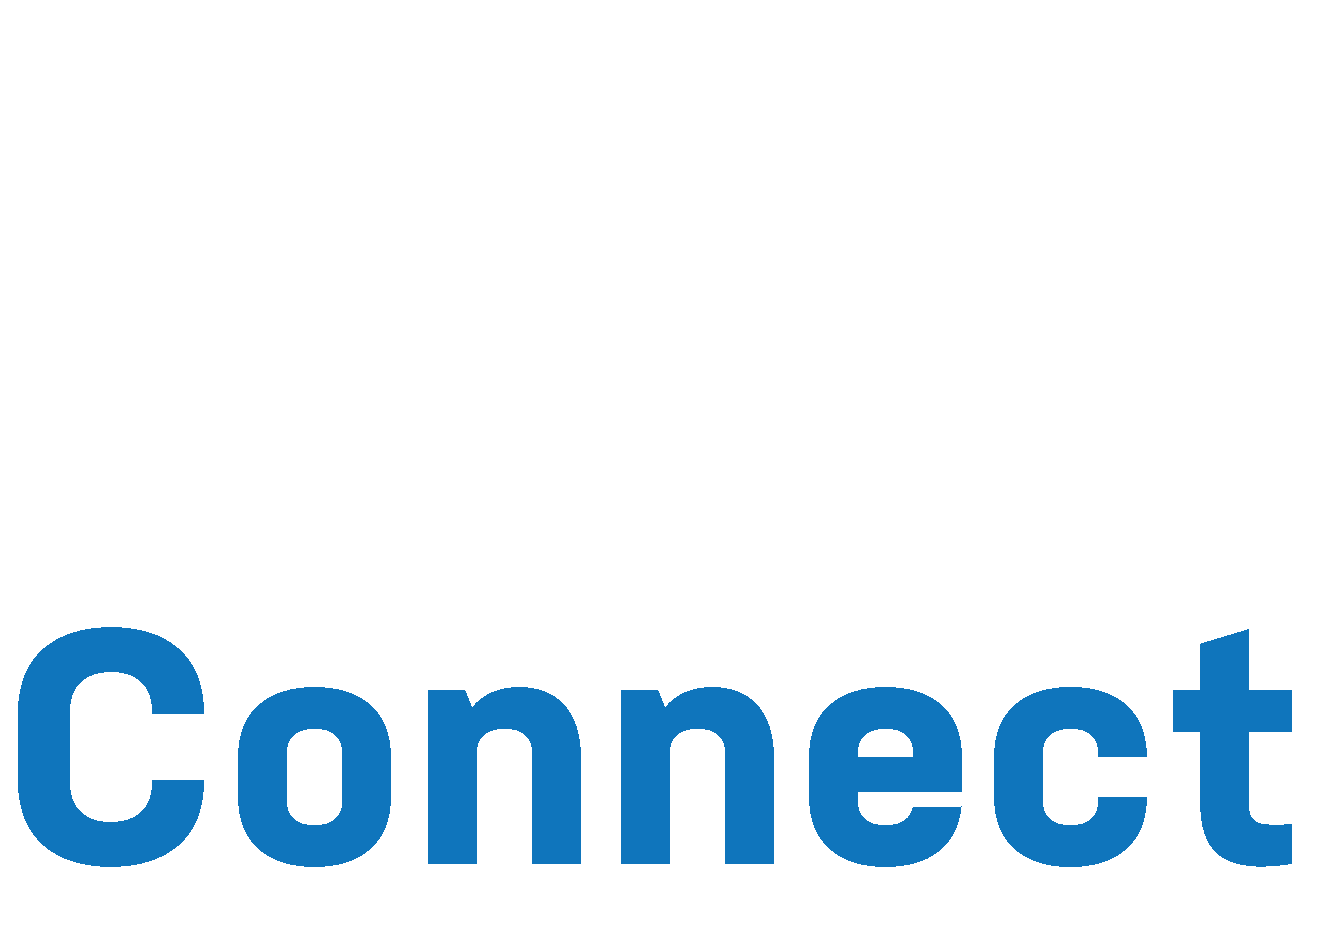 AMI Connect